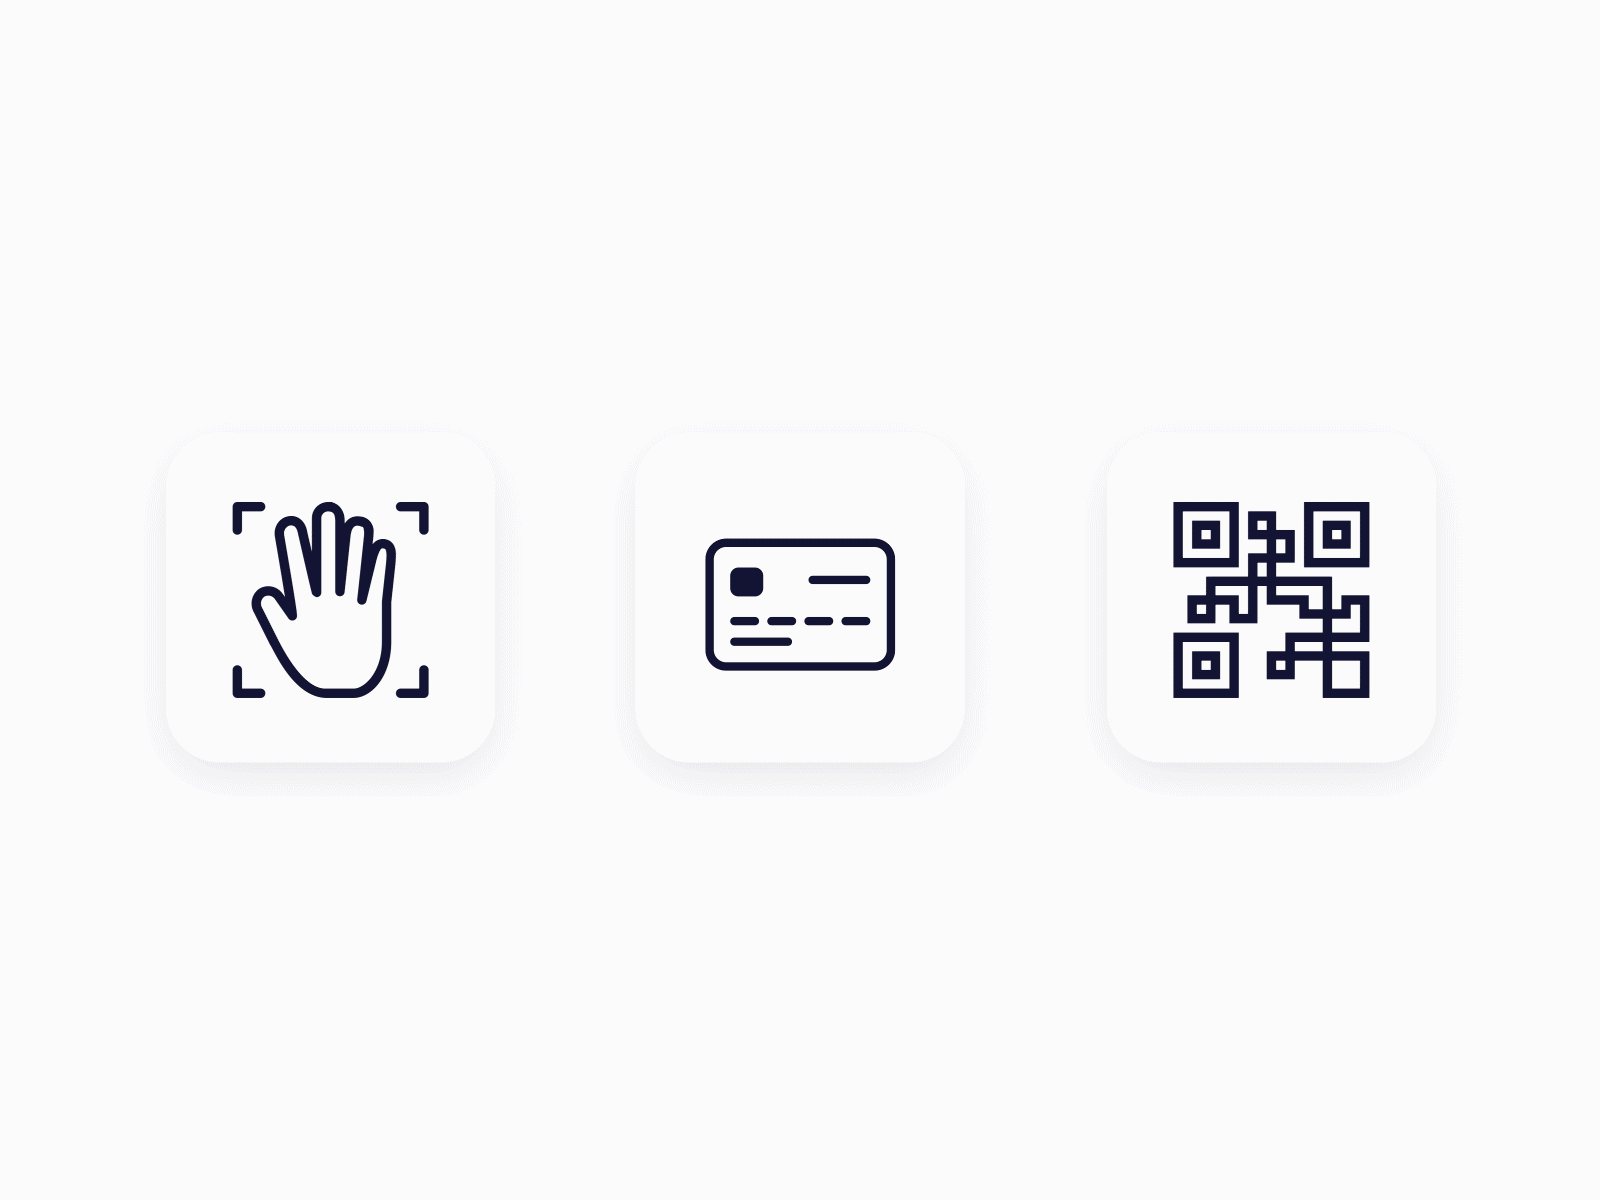 Ecommerce Animated Icons aniamtion bank card design ecommerce icons illustrator motion qr scan ui ux vector web